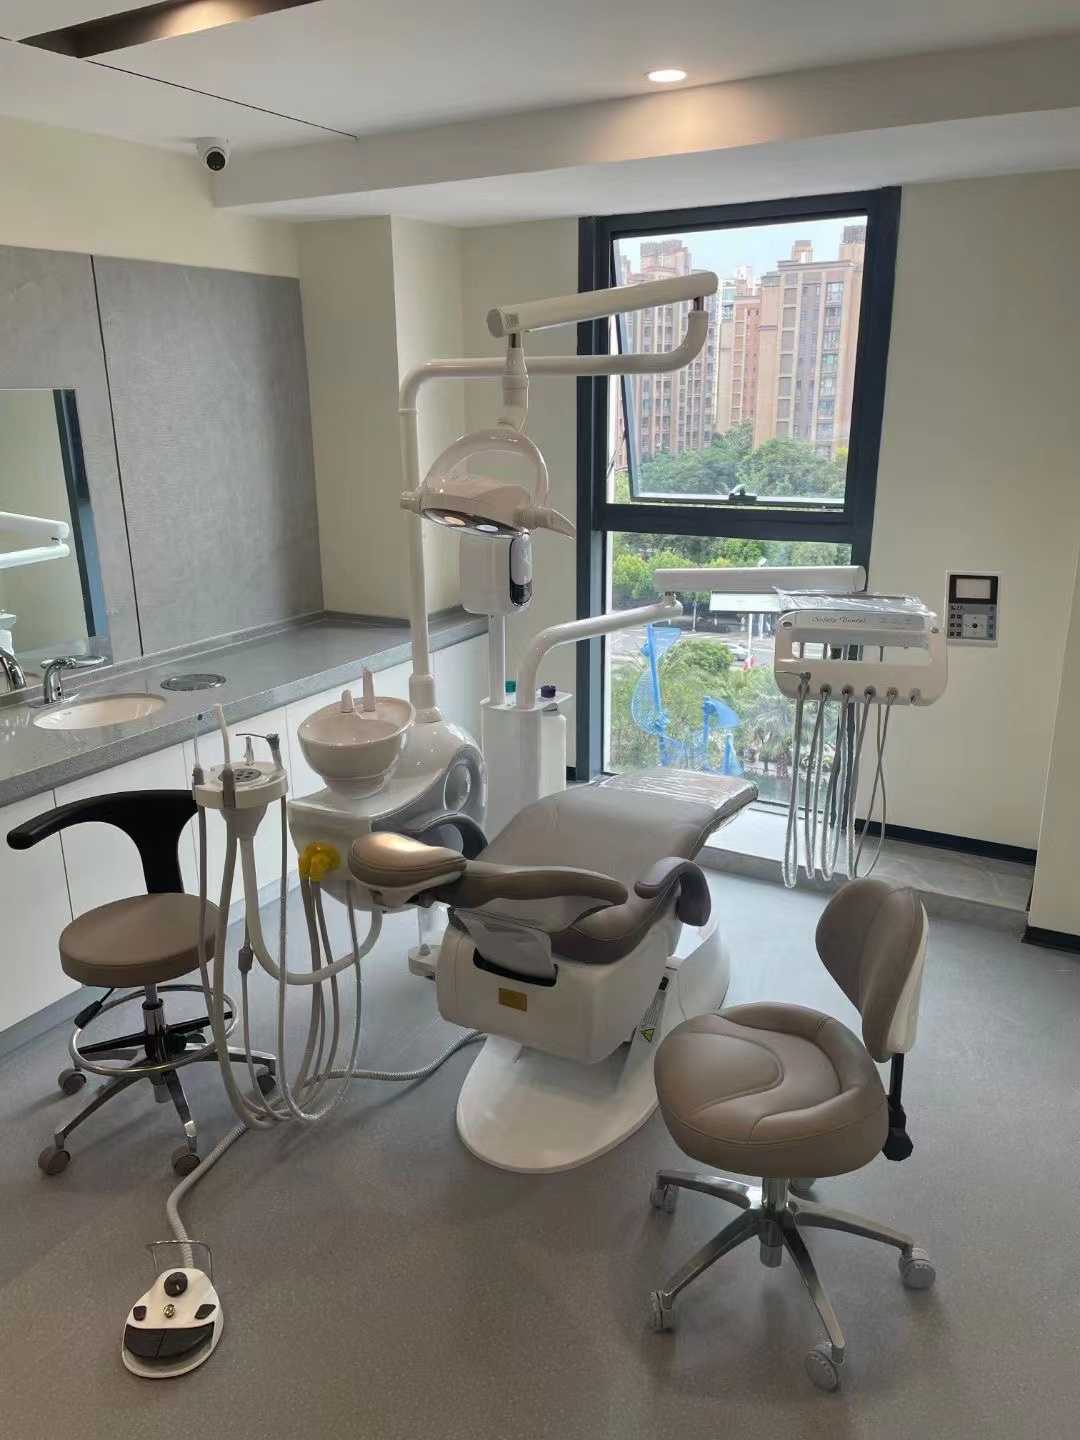 3 Essential Tips for Dental Chair Care And Maintenance